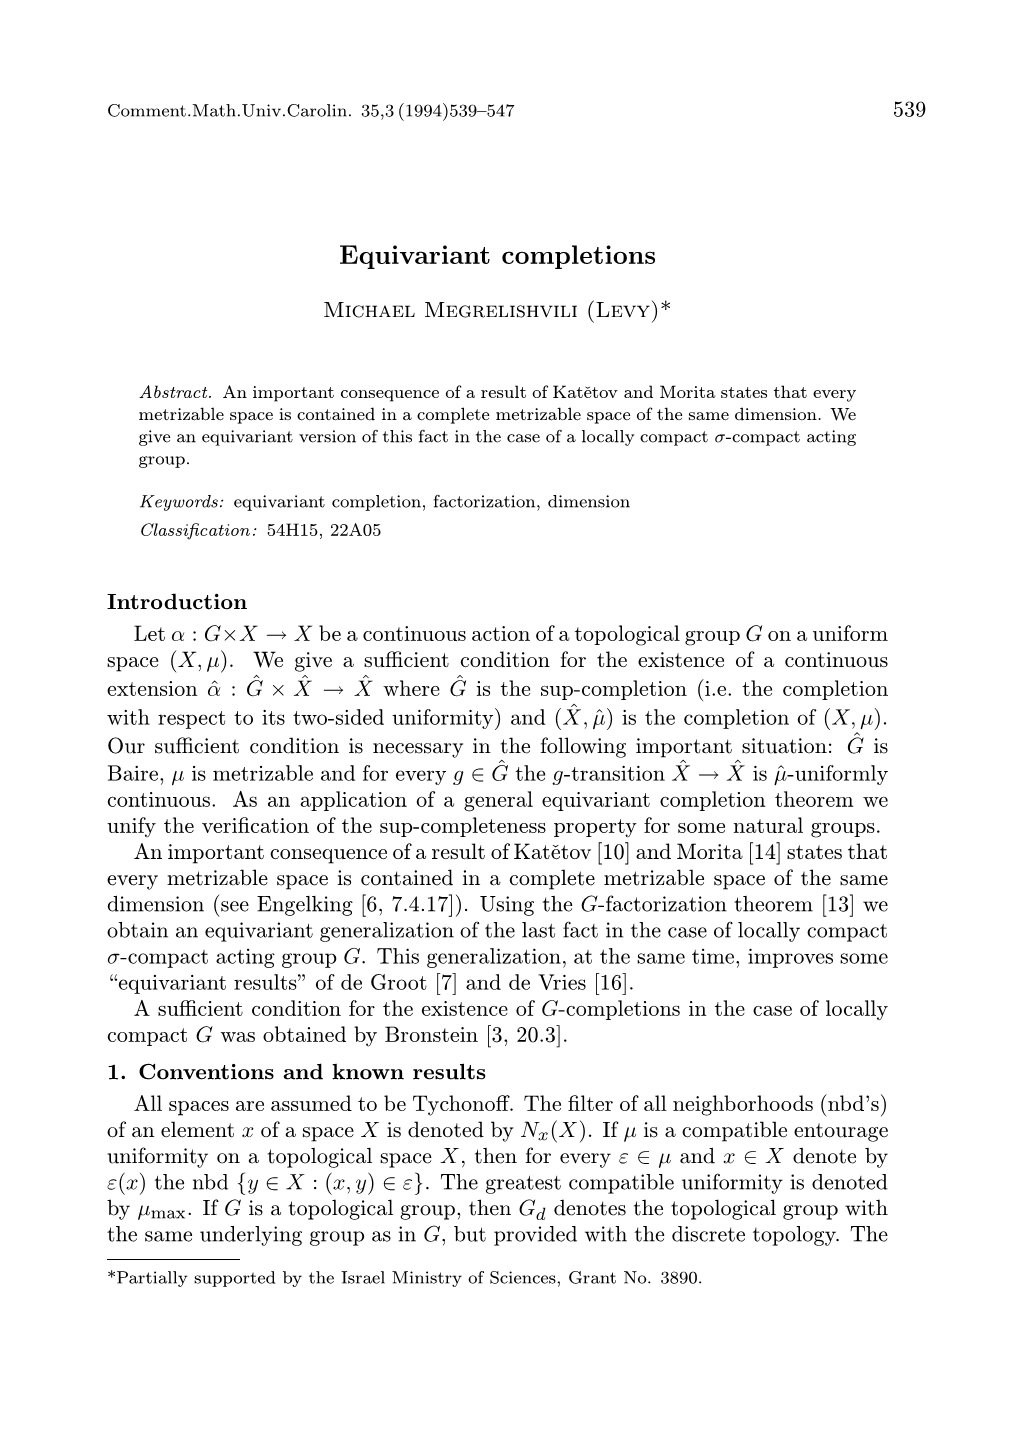 Equivariant Completions